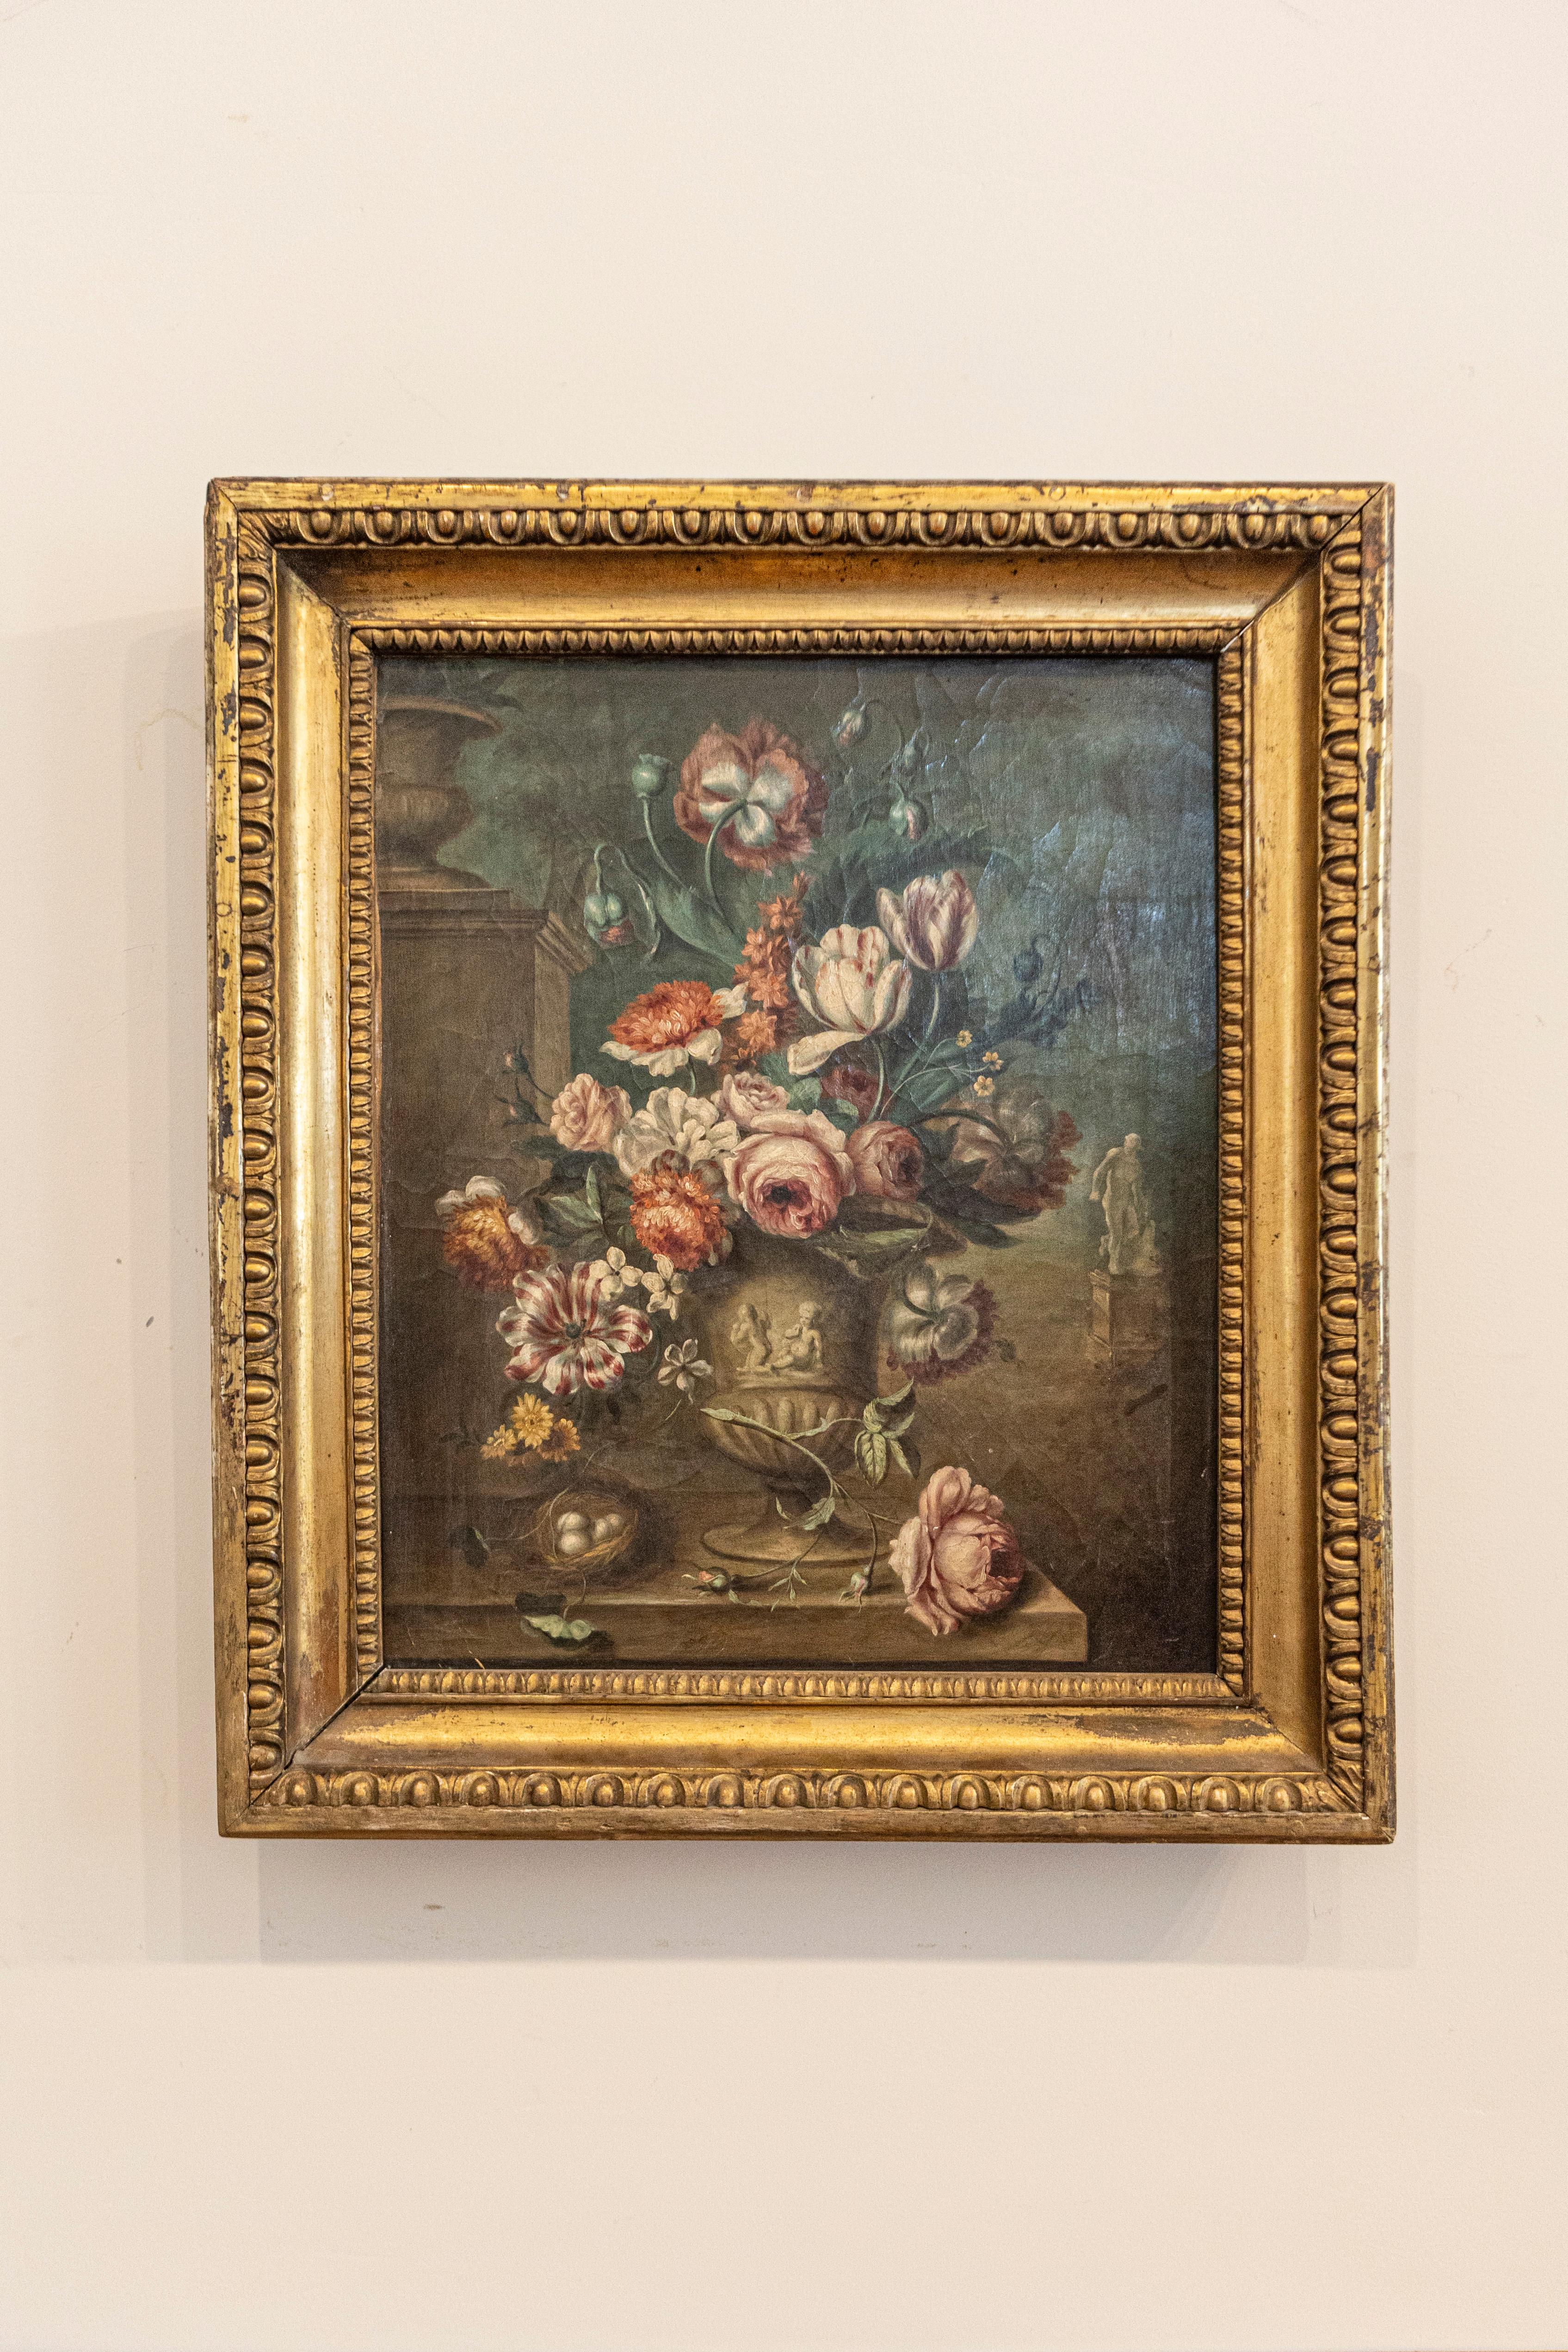 A French framed oil on canvas still-life painting from the mid-19th century, depicting a colorful bouquet of flowers in a vase, set in a carved giltwood frame. Born in France at the beginning of Emperor Napoleon III's reign, this vertical oil on